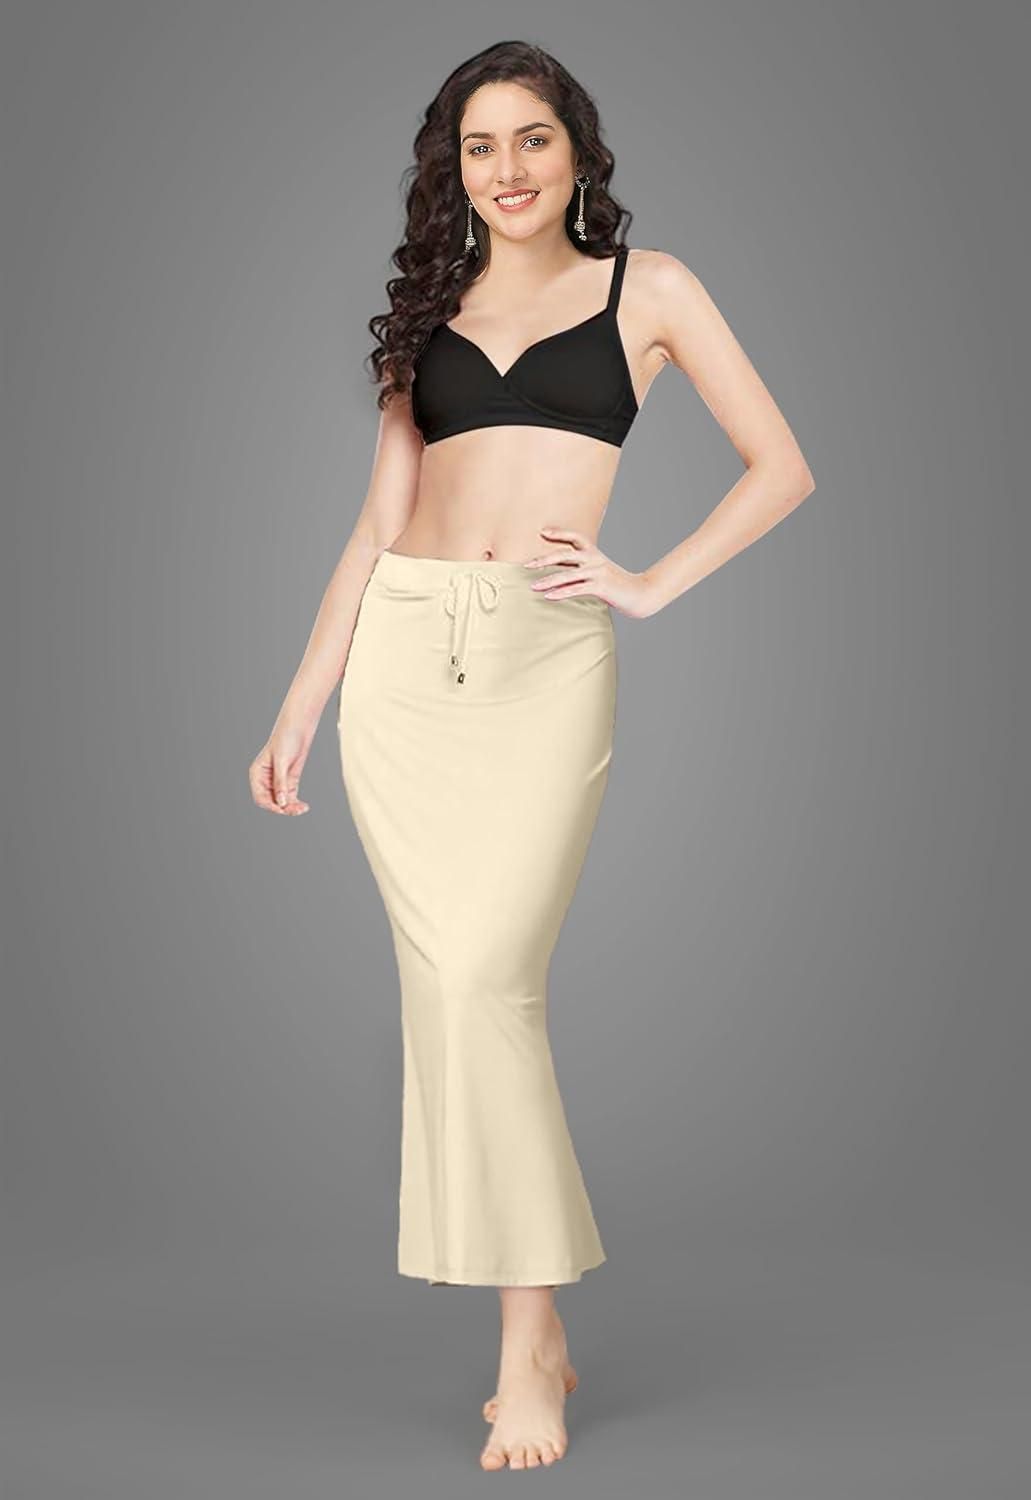 Saree shapers and Shapewear Petticoats For Womens – Mehrang Exim